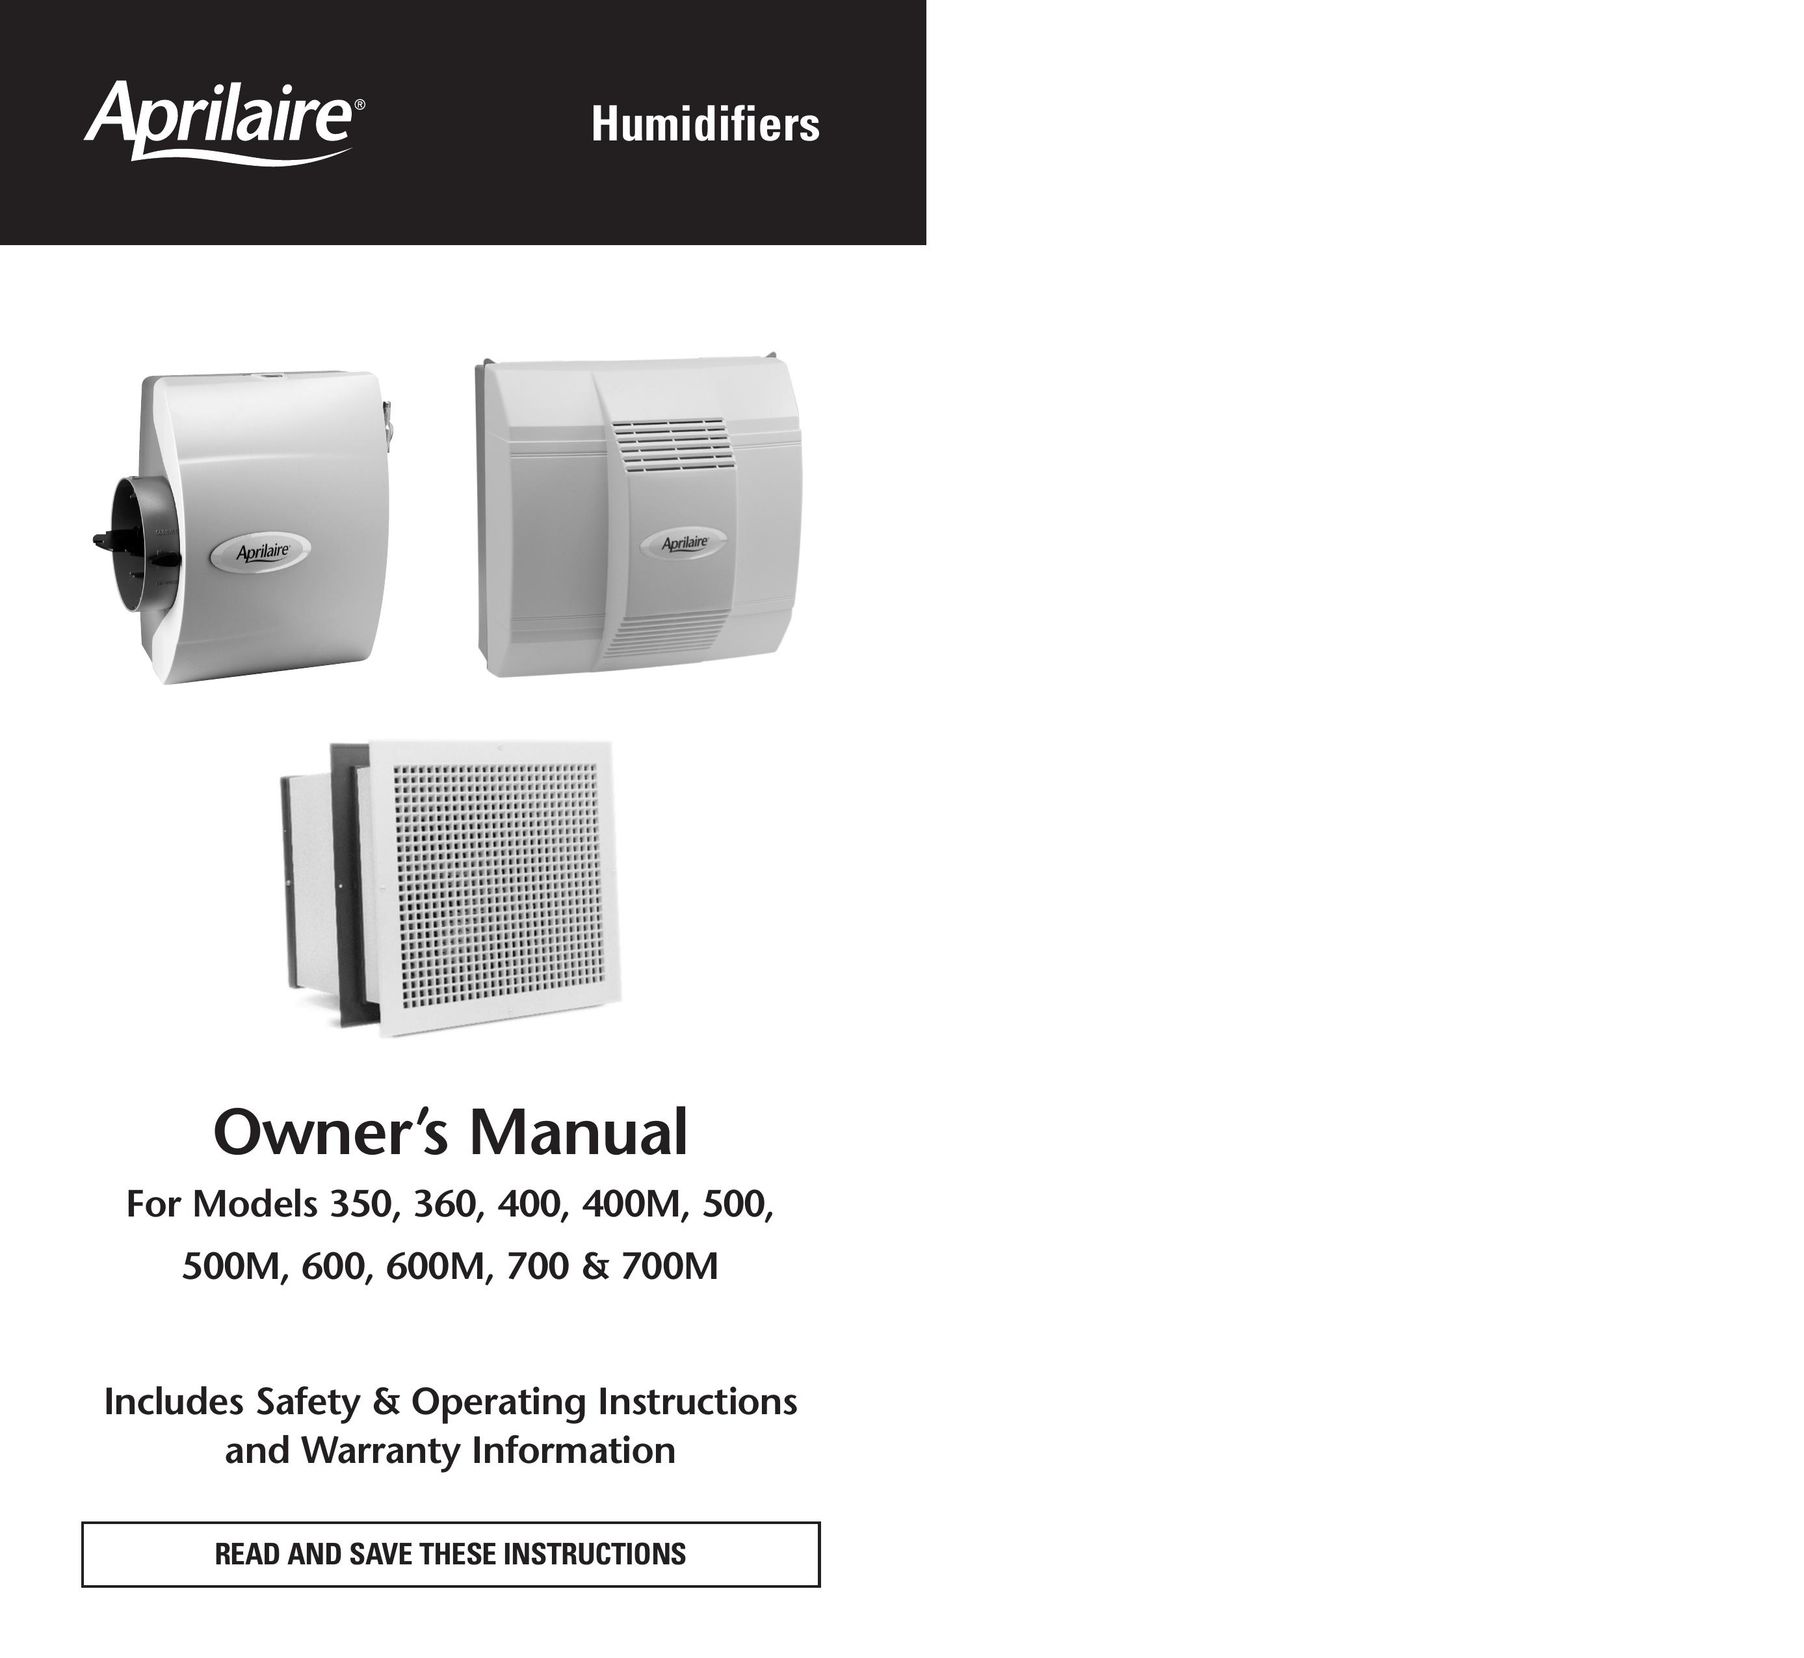 Aprilaire 600 Humidifier User Manual